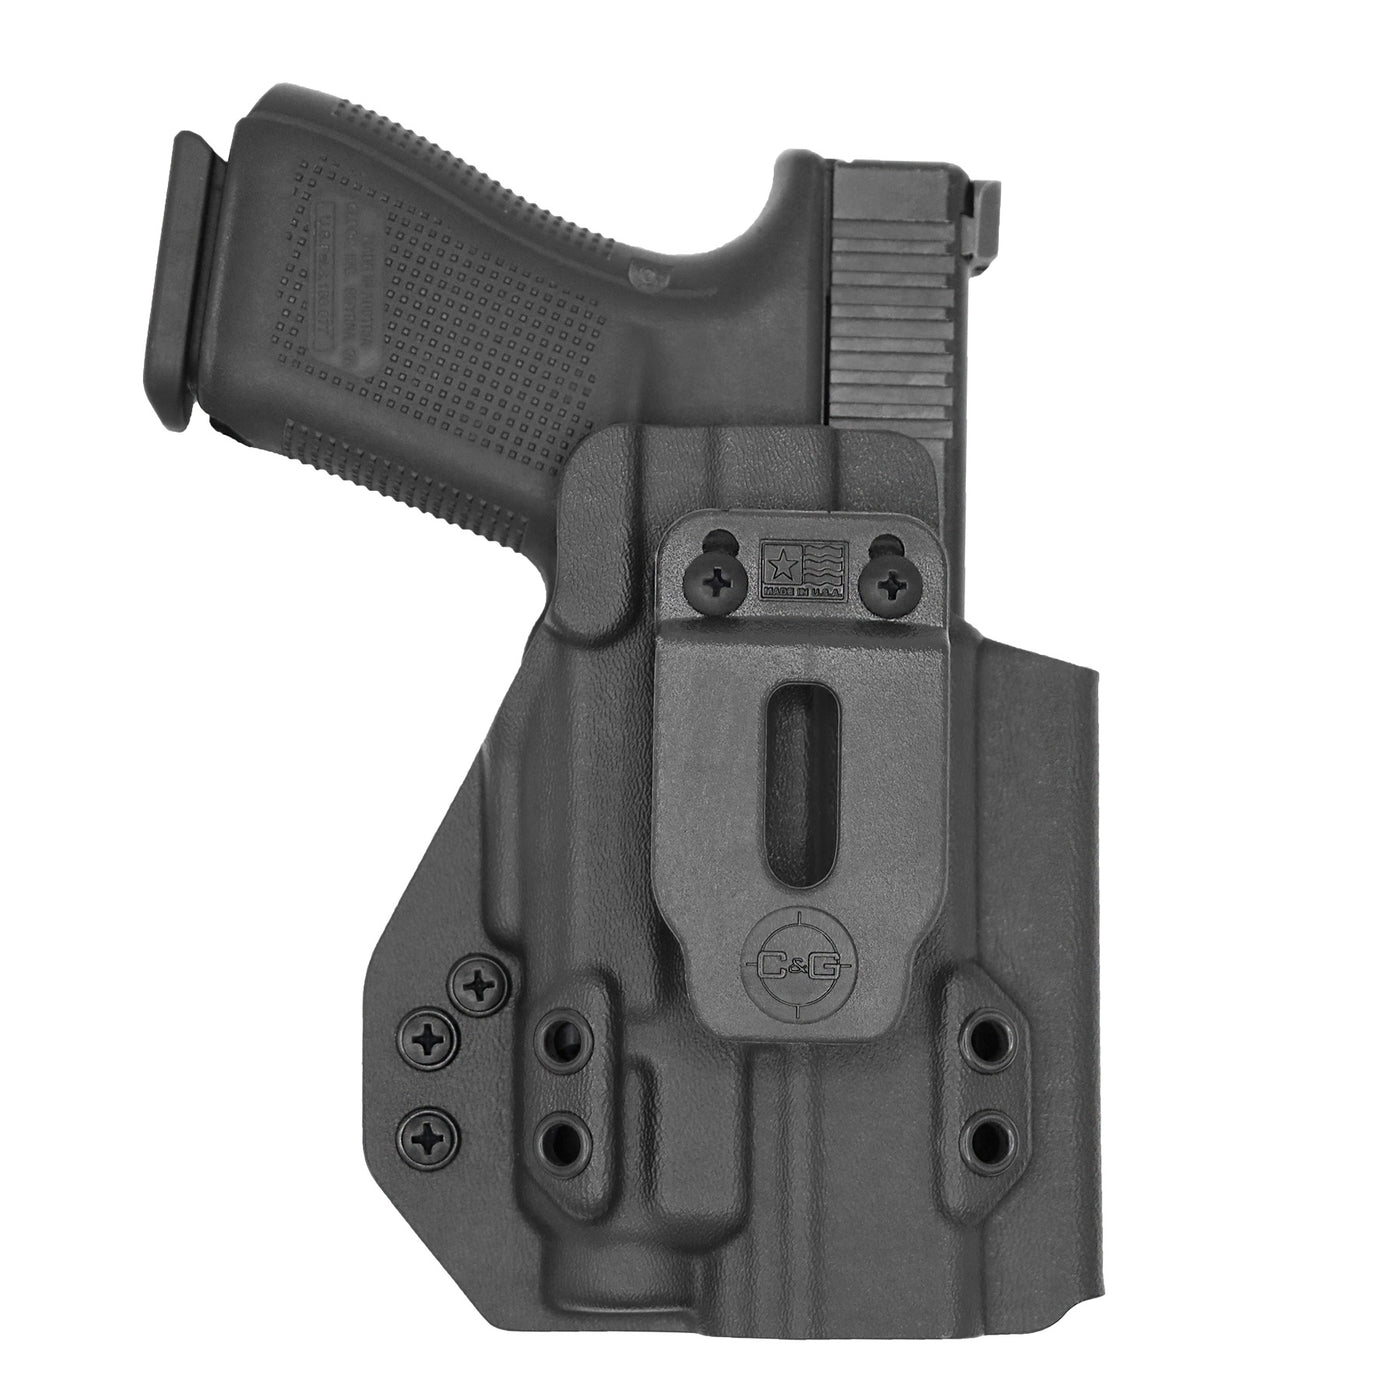 C&G Holsters Custom IWB Tactical Glock 19/23 Streamlight TLR7 in holstered position